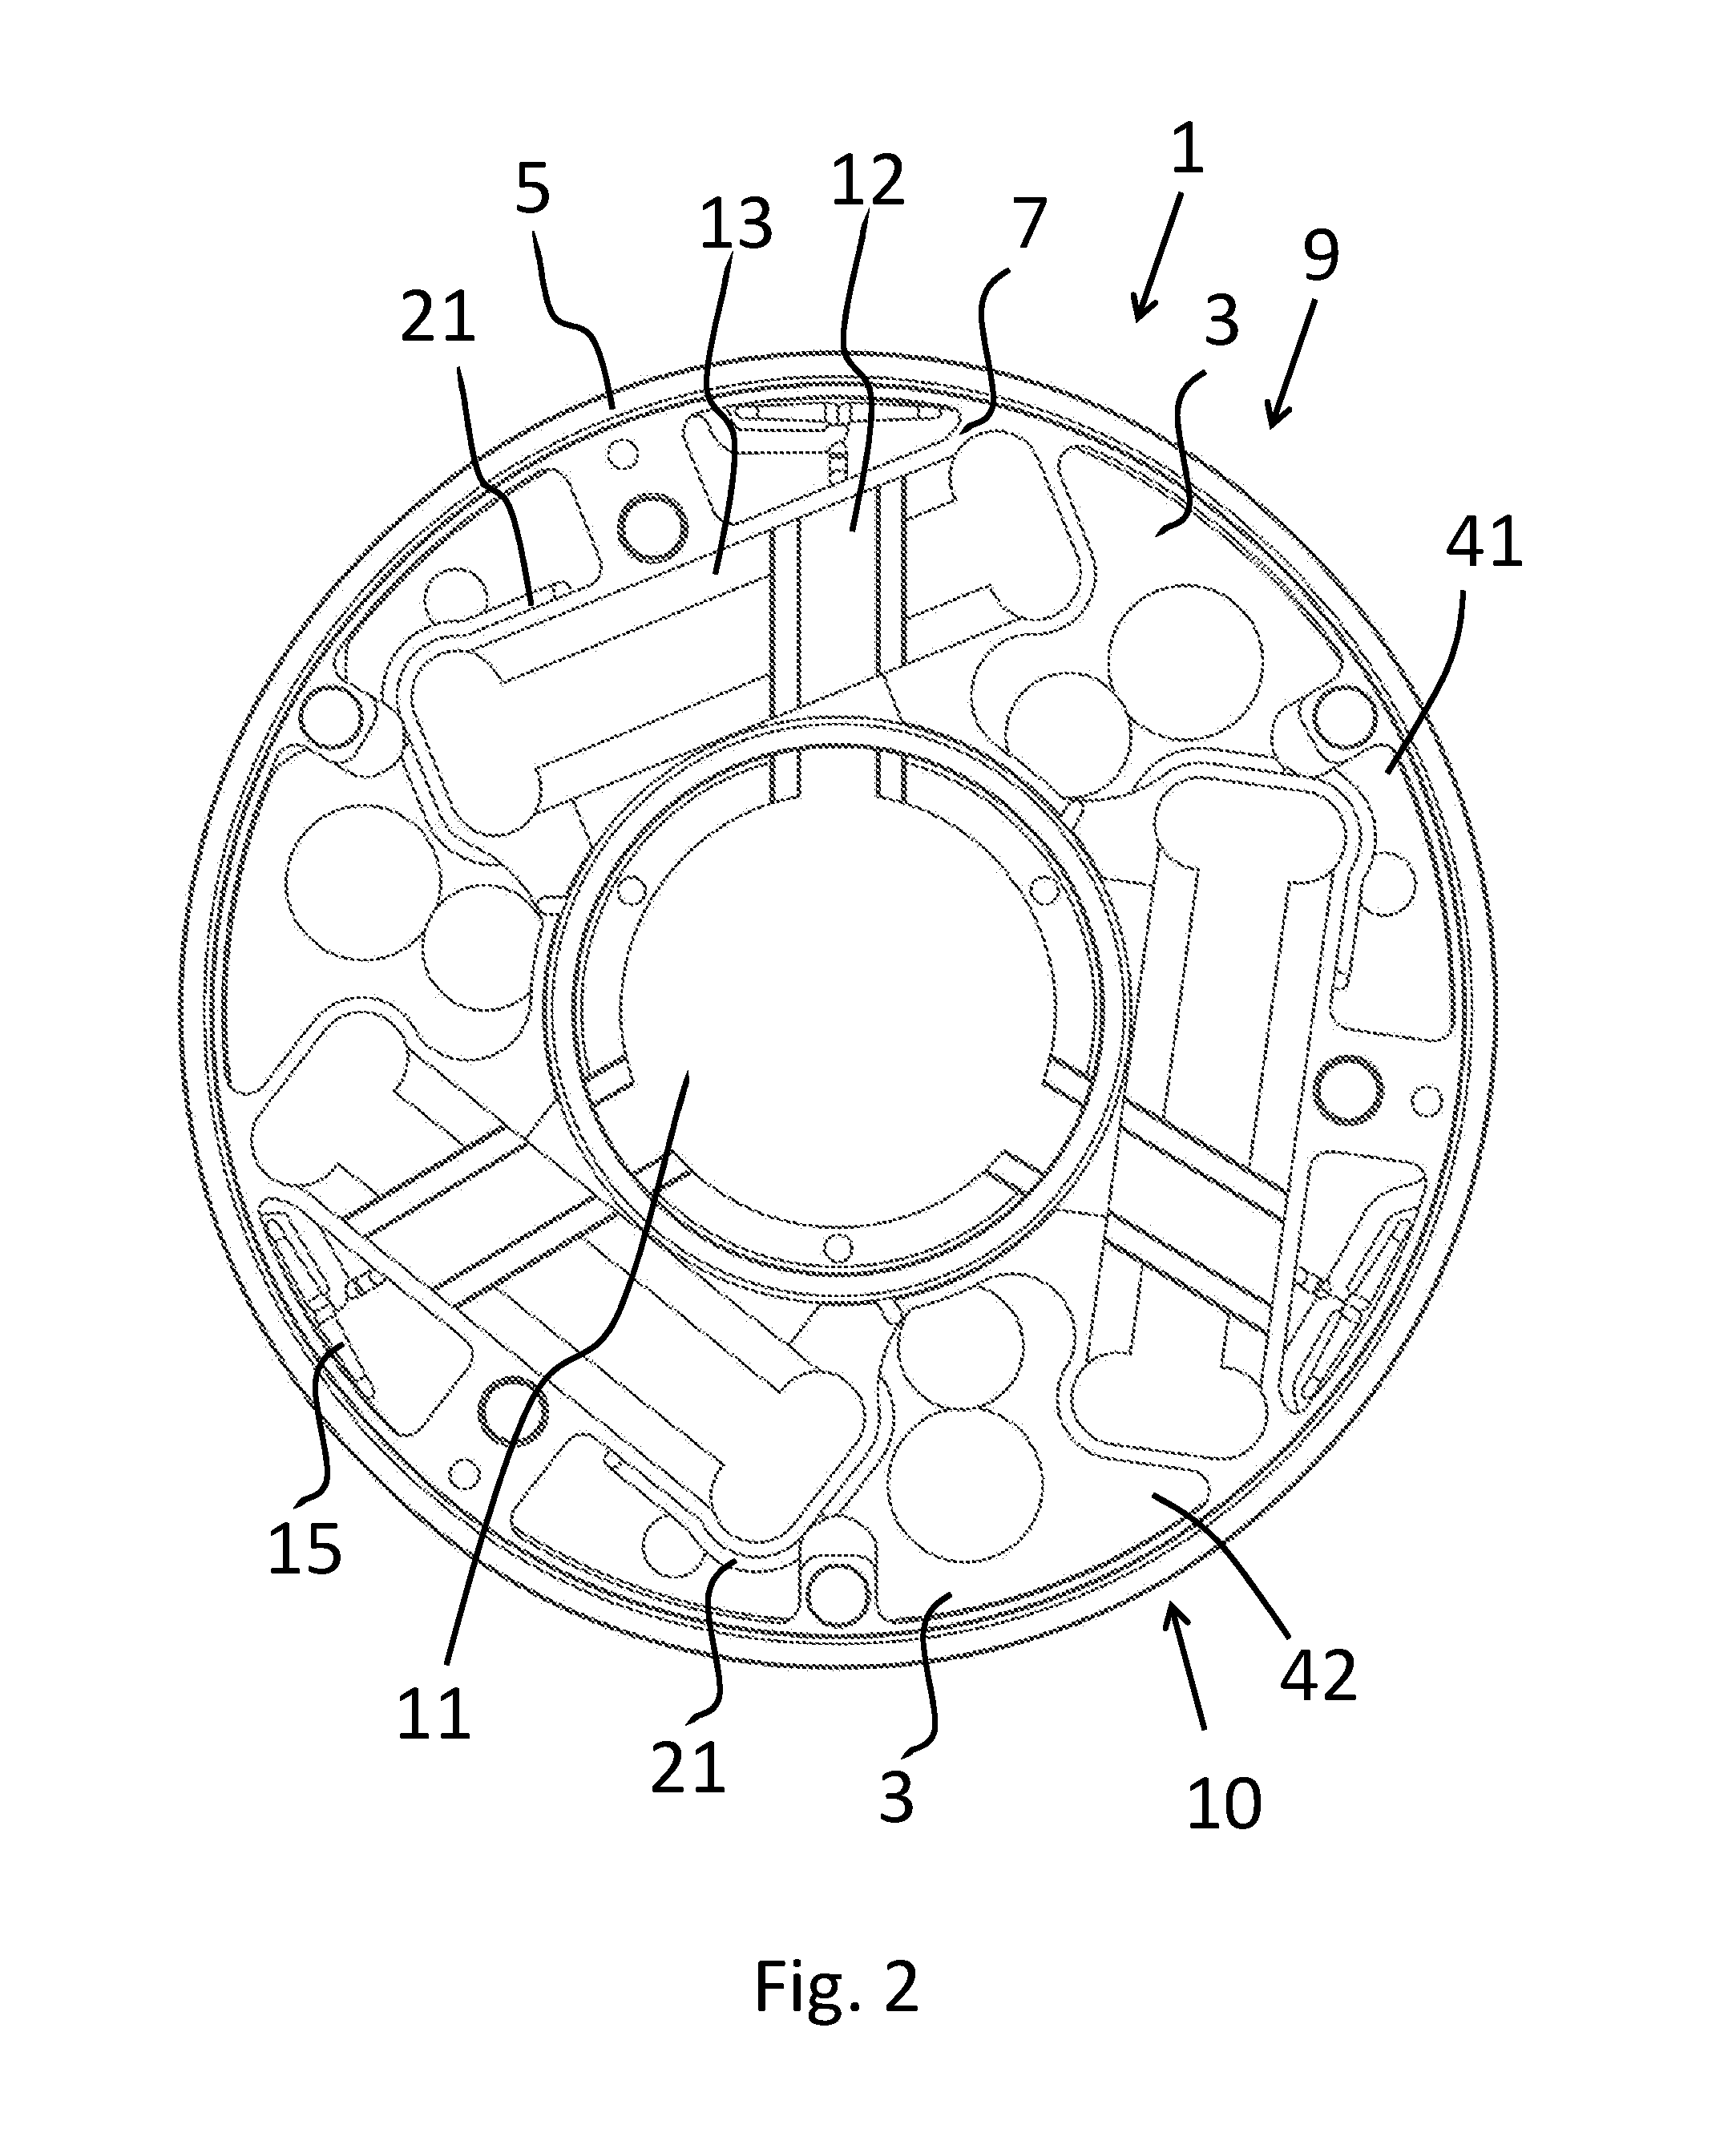 Ultra-lightweight clamping device